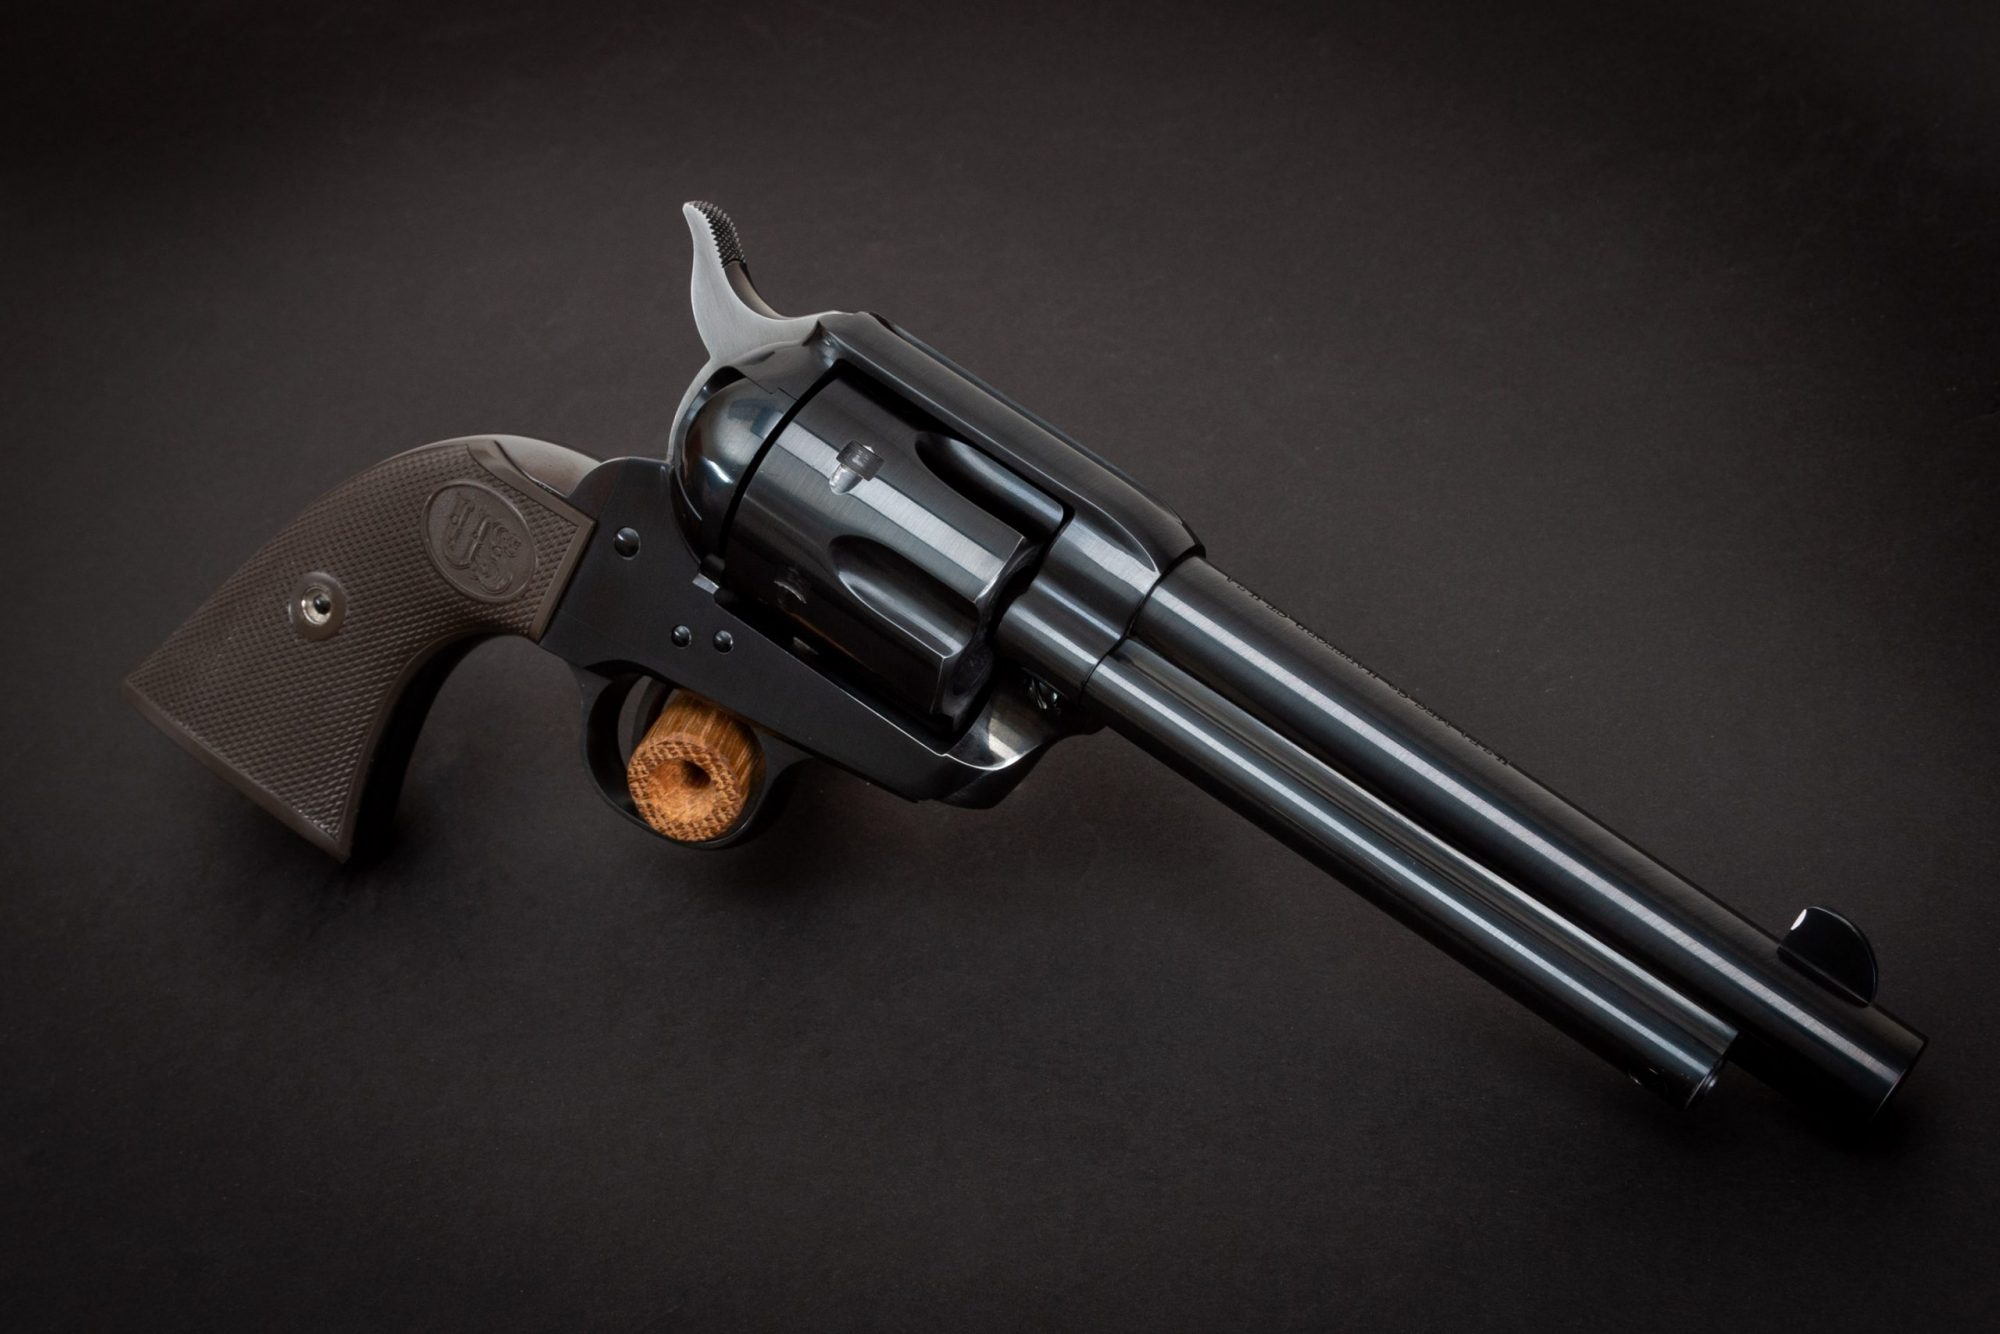 Photo of a U.S. Fire Arms (USFA) Single Action Army (SAA) Revolver featuring USFA Dome Blue finish by Turnbull Restoration of Bloomfield, NY